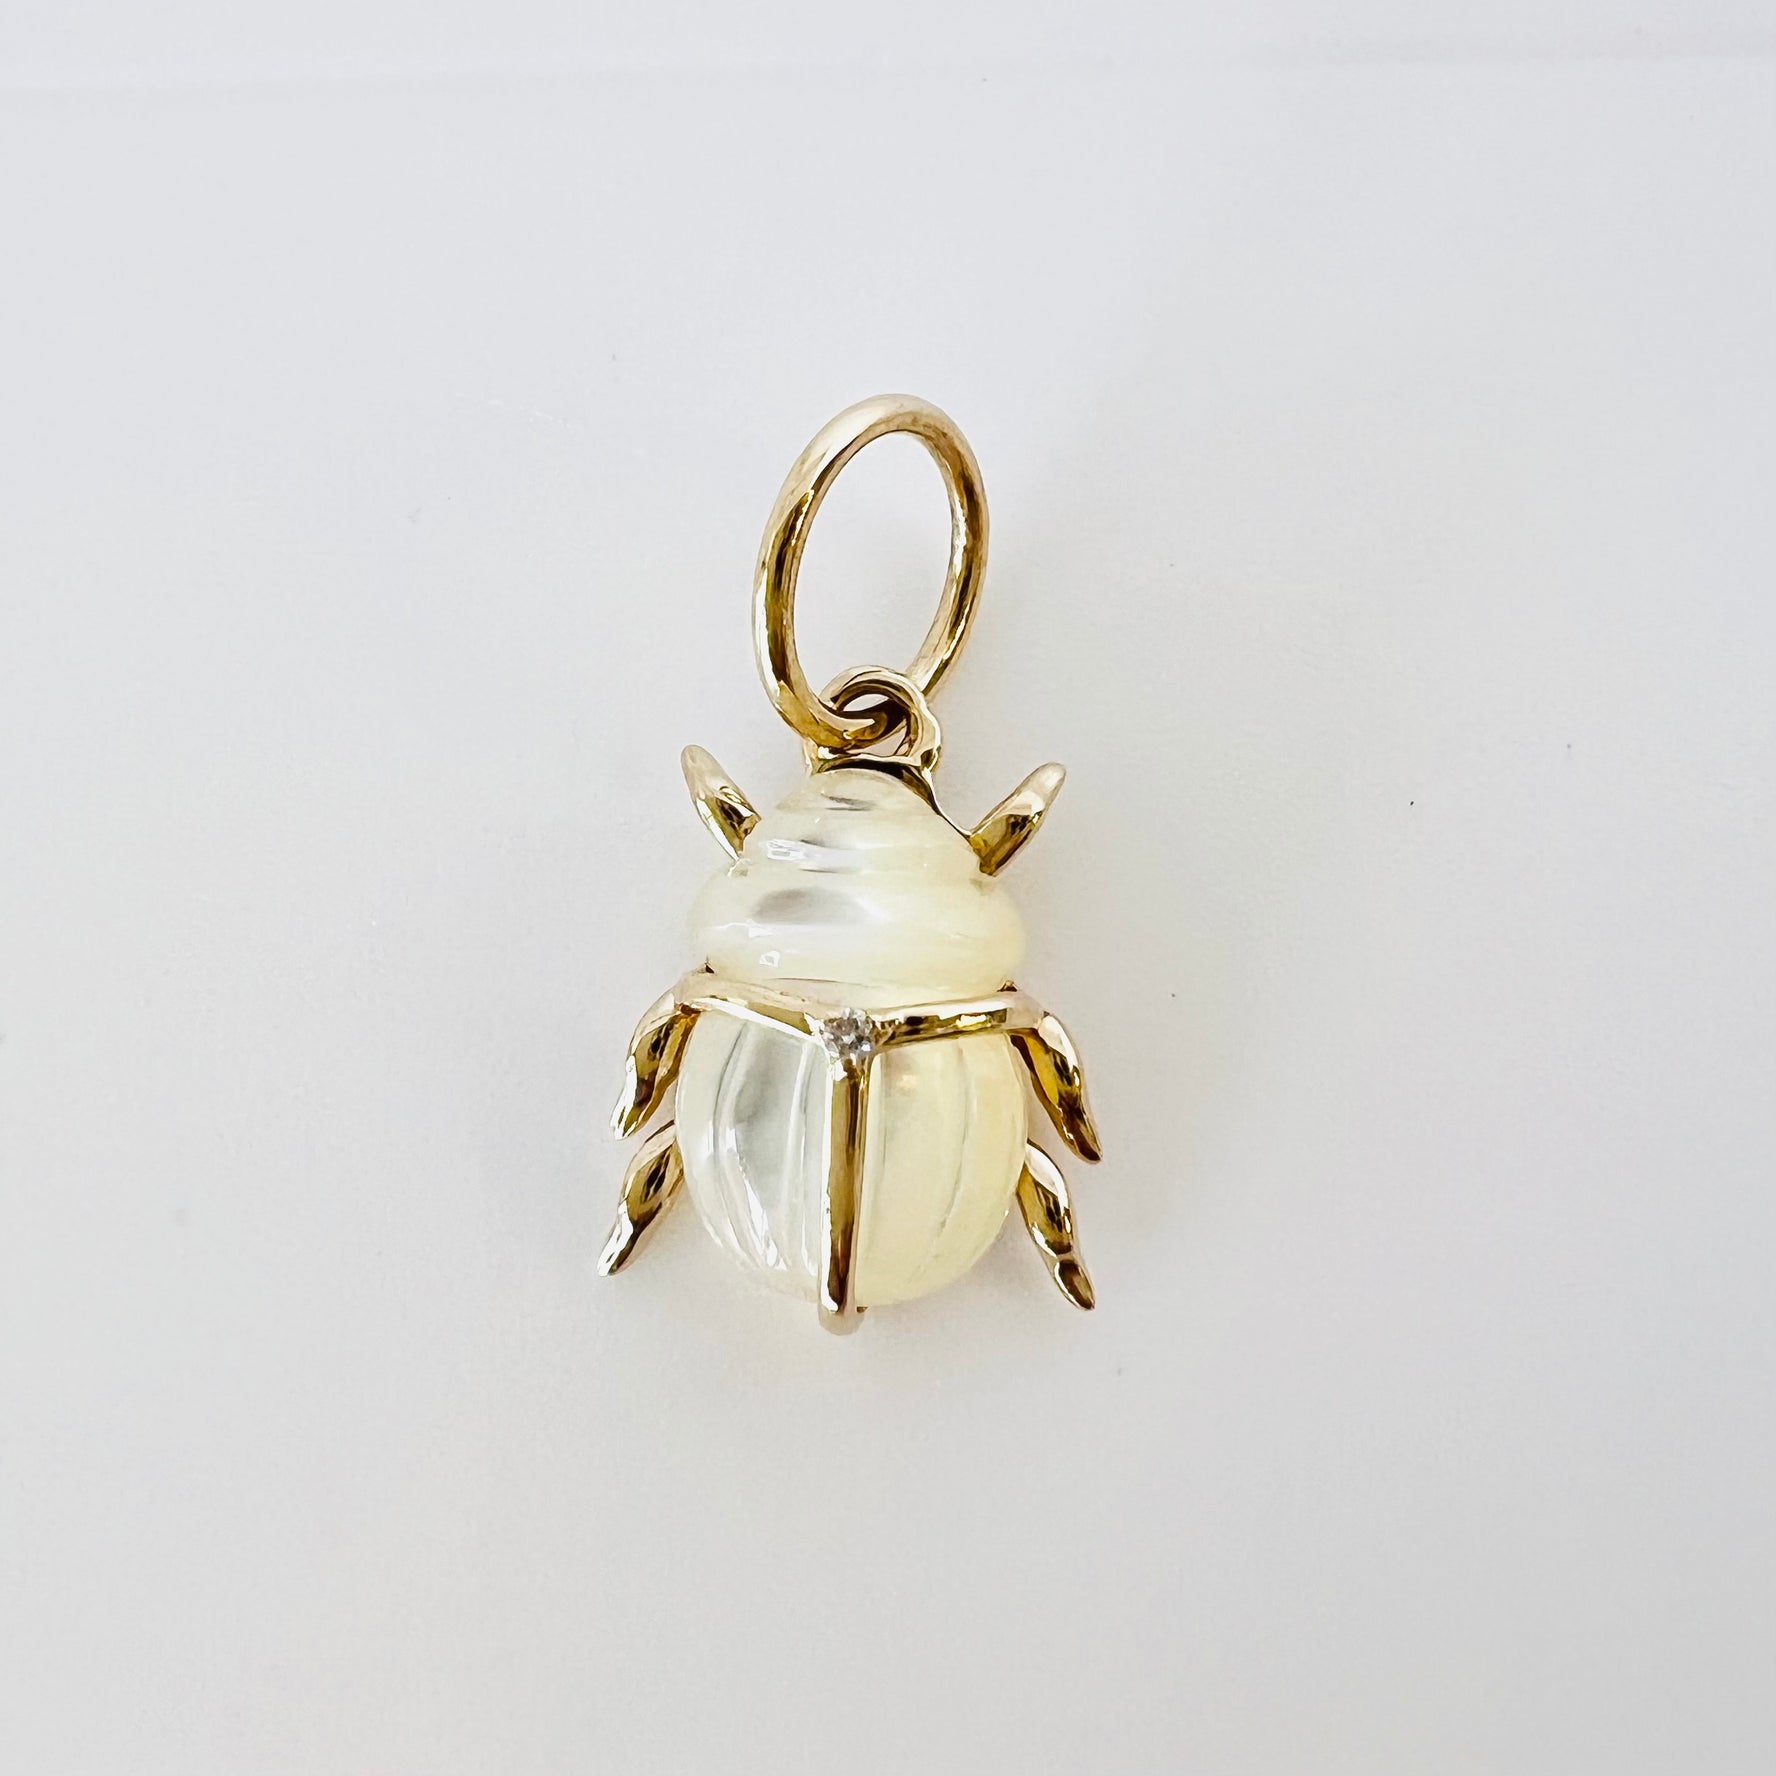 14k gold and mother of pearl bug pendant/charm